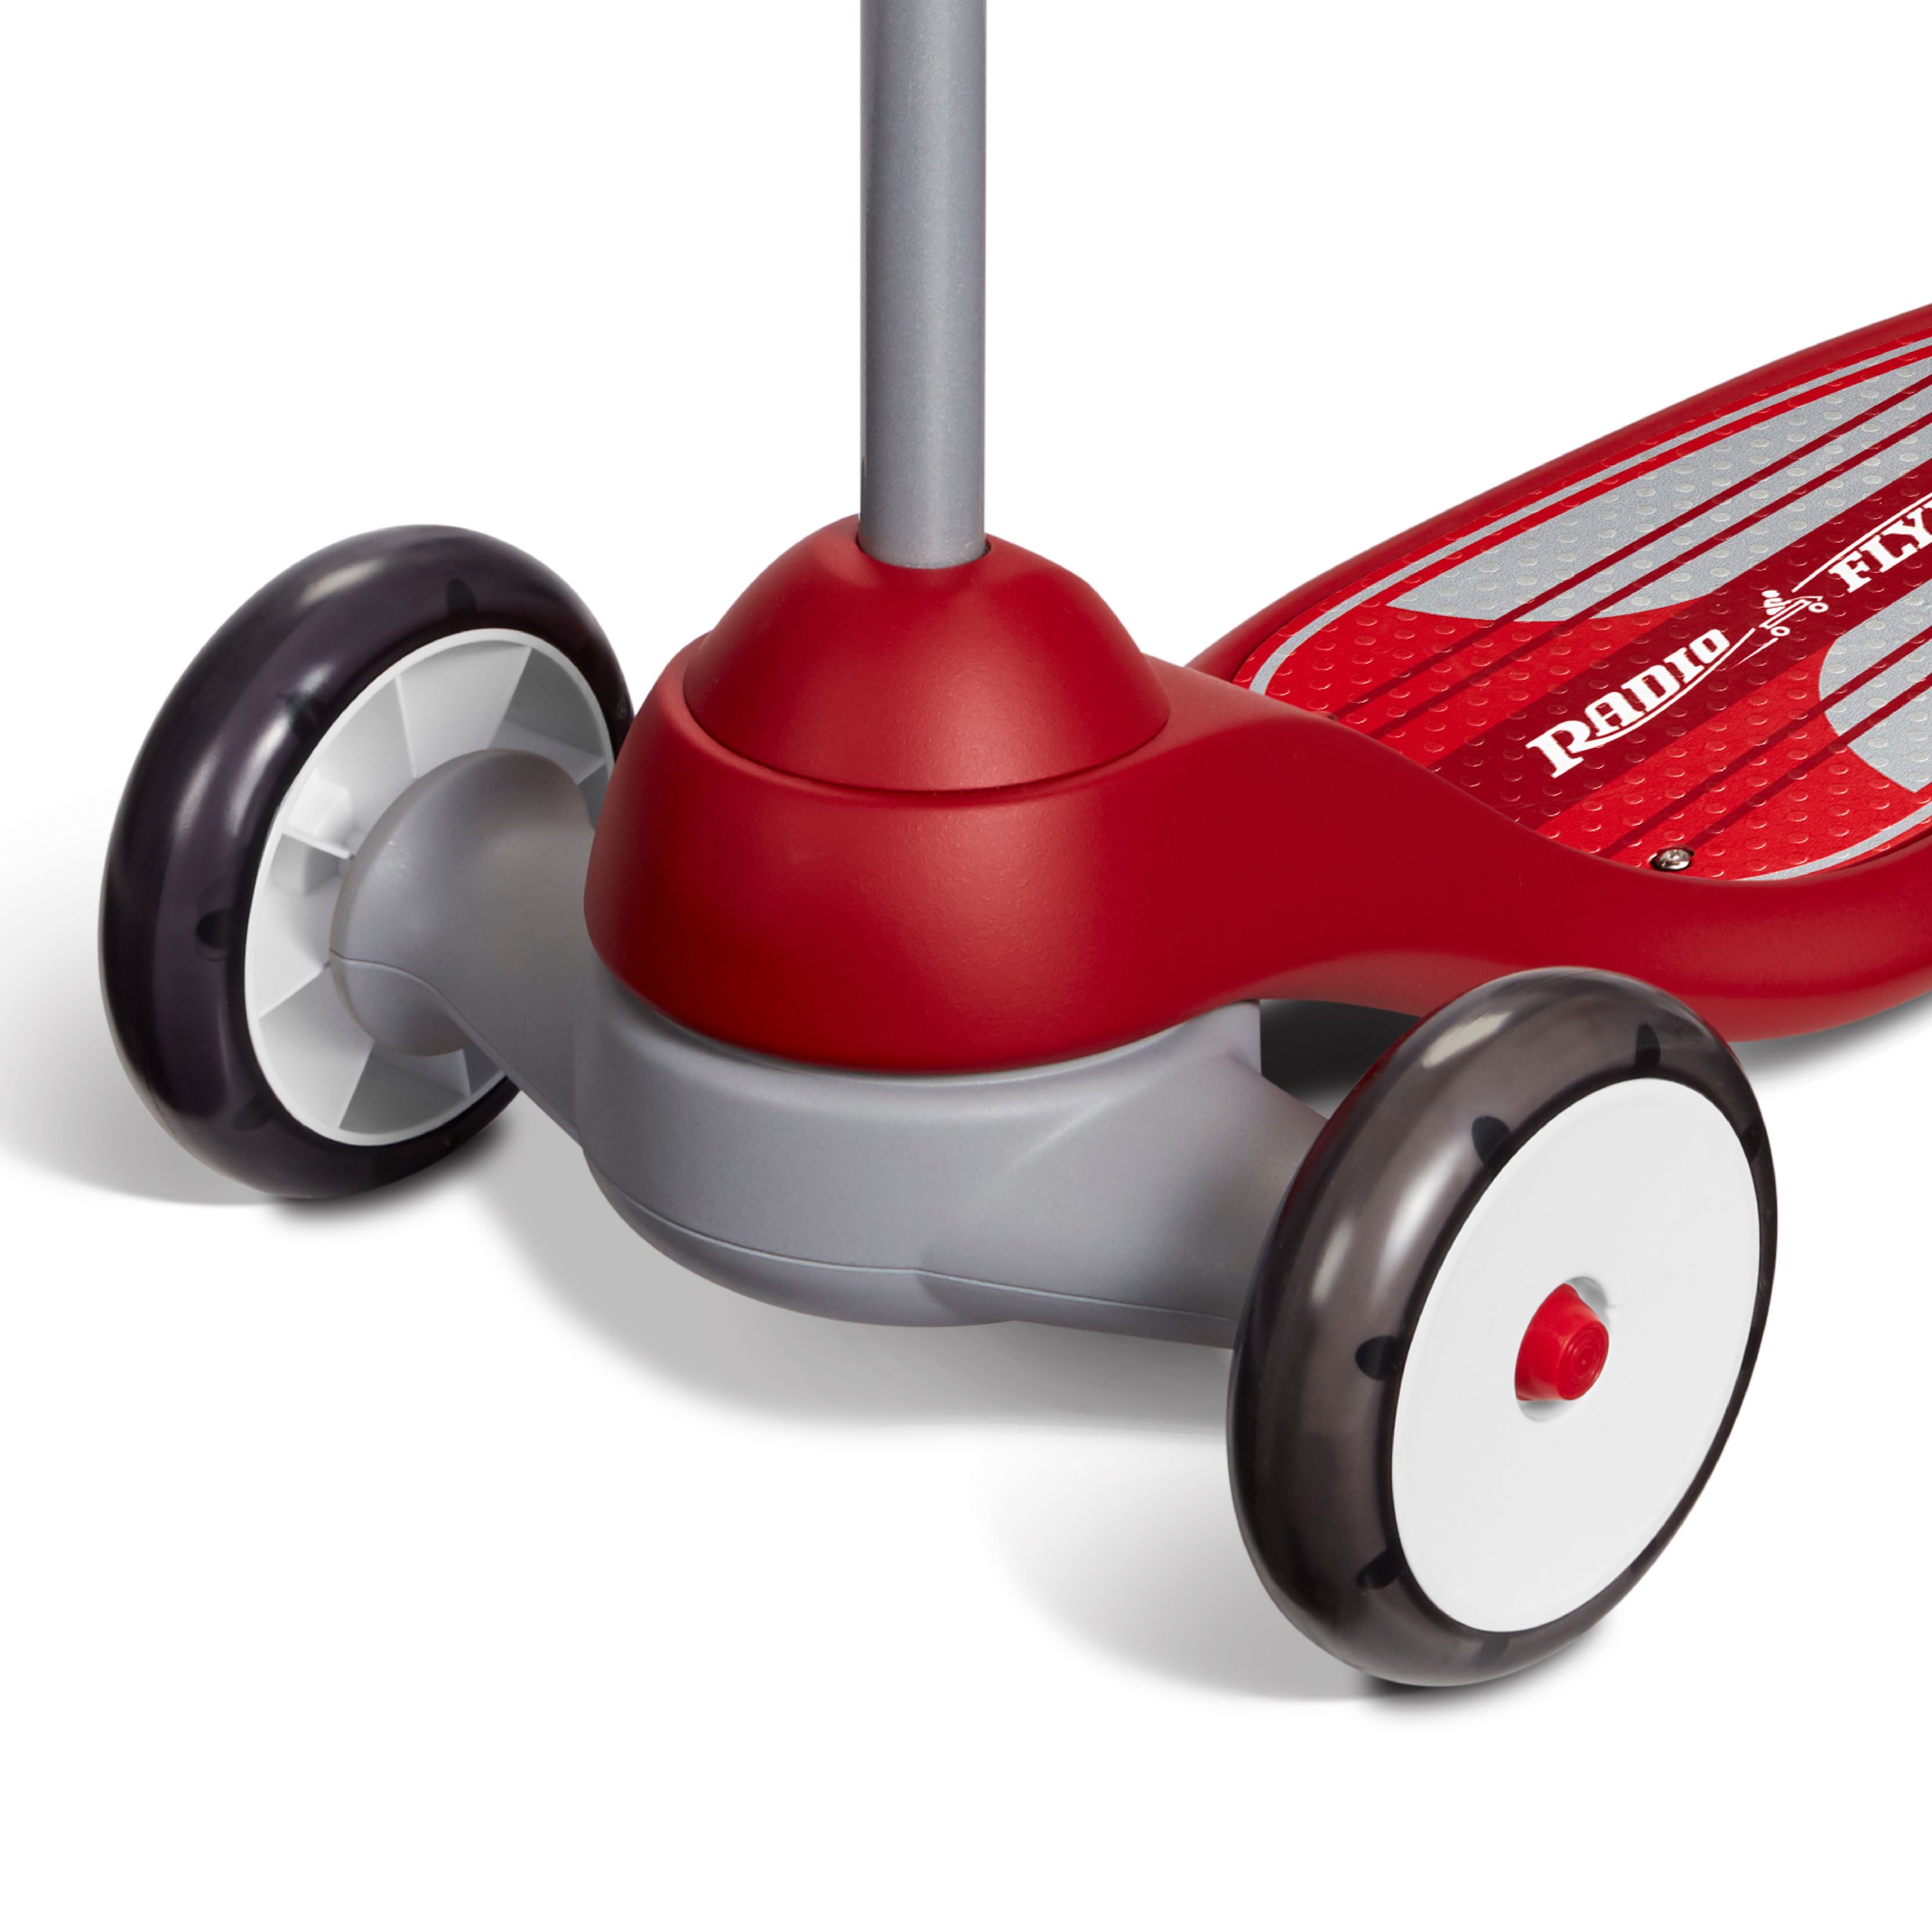 Radio Flyer, My 1st Scooter Sport, Three Wheel Scooter, Red - image 6 of 7